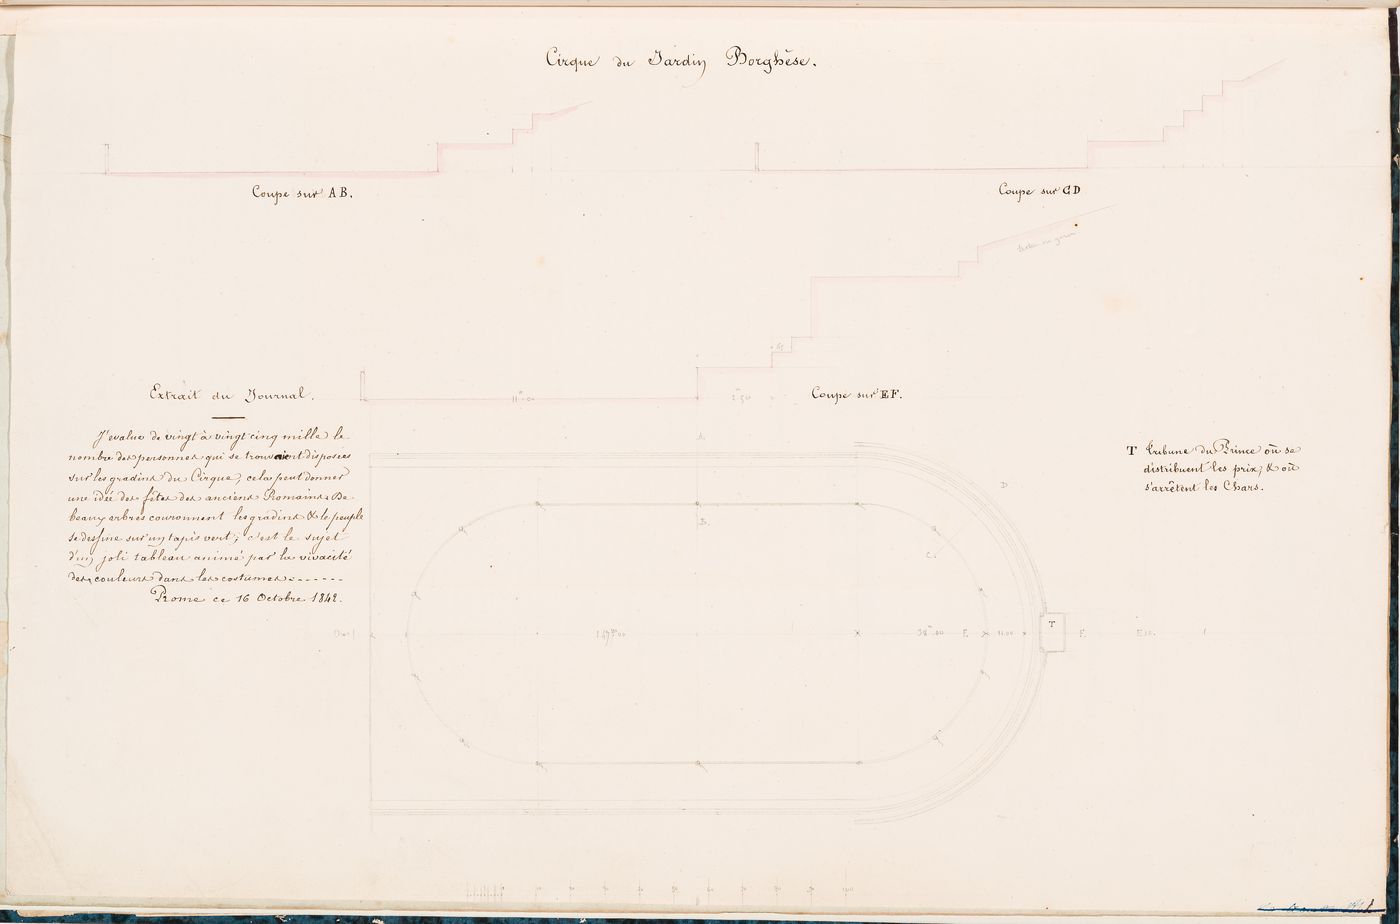 Hippodrome, Villa Borghese, Rome: Plan and sections